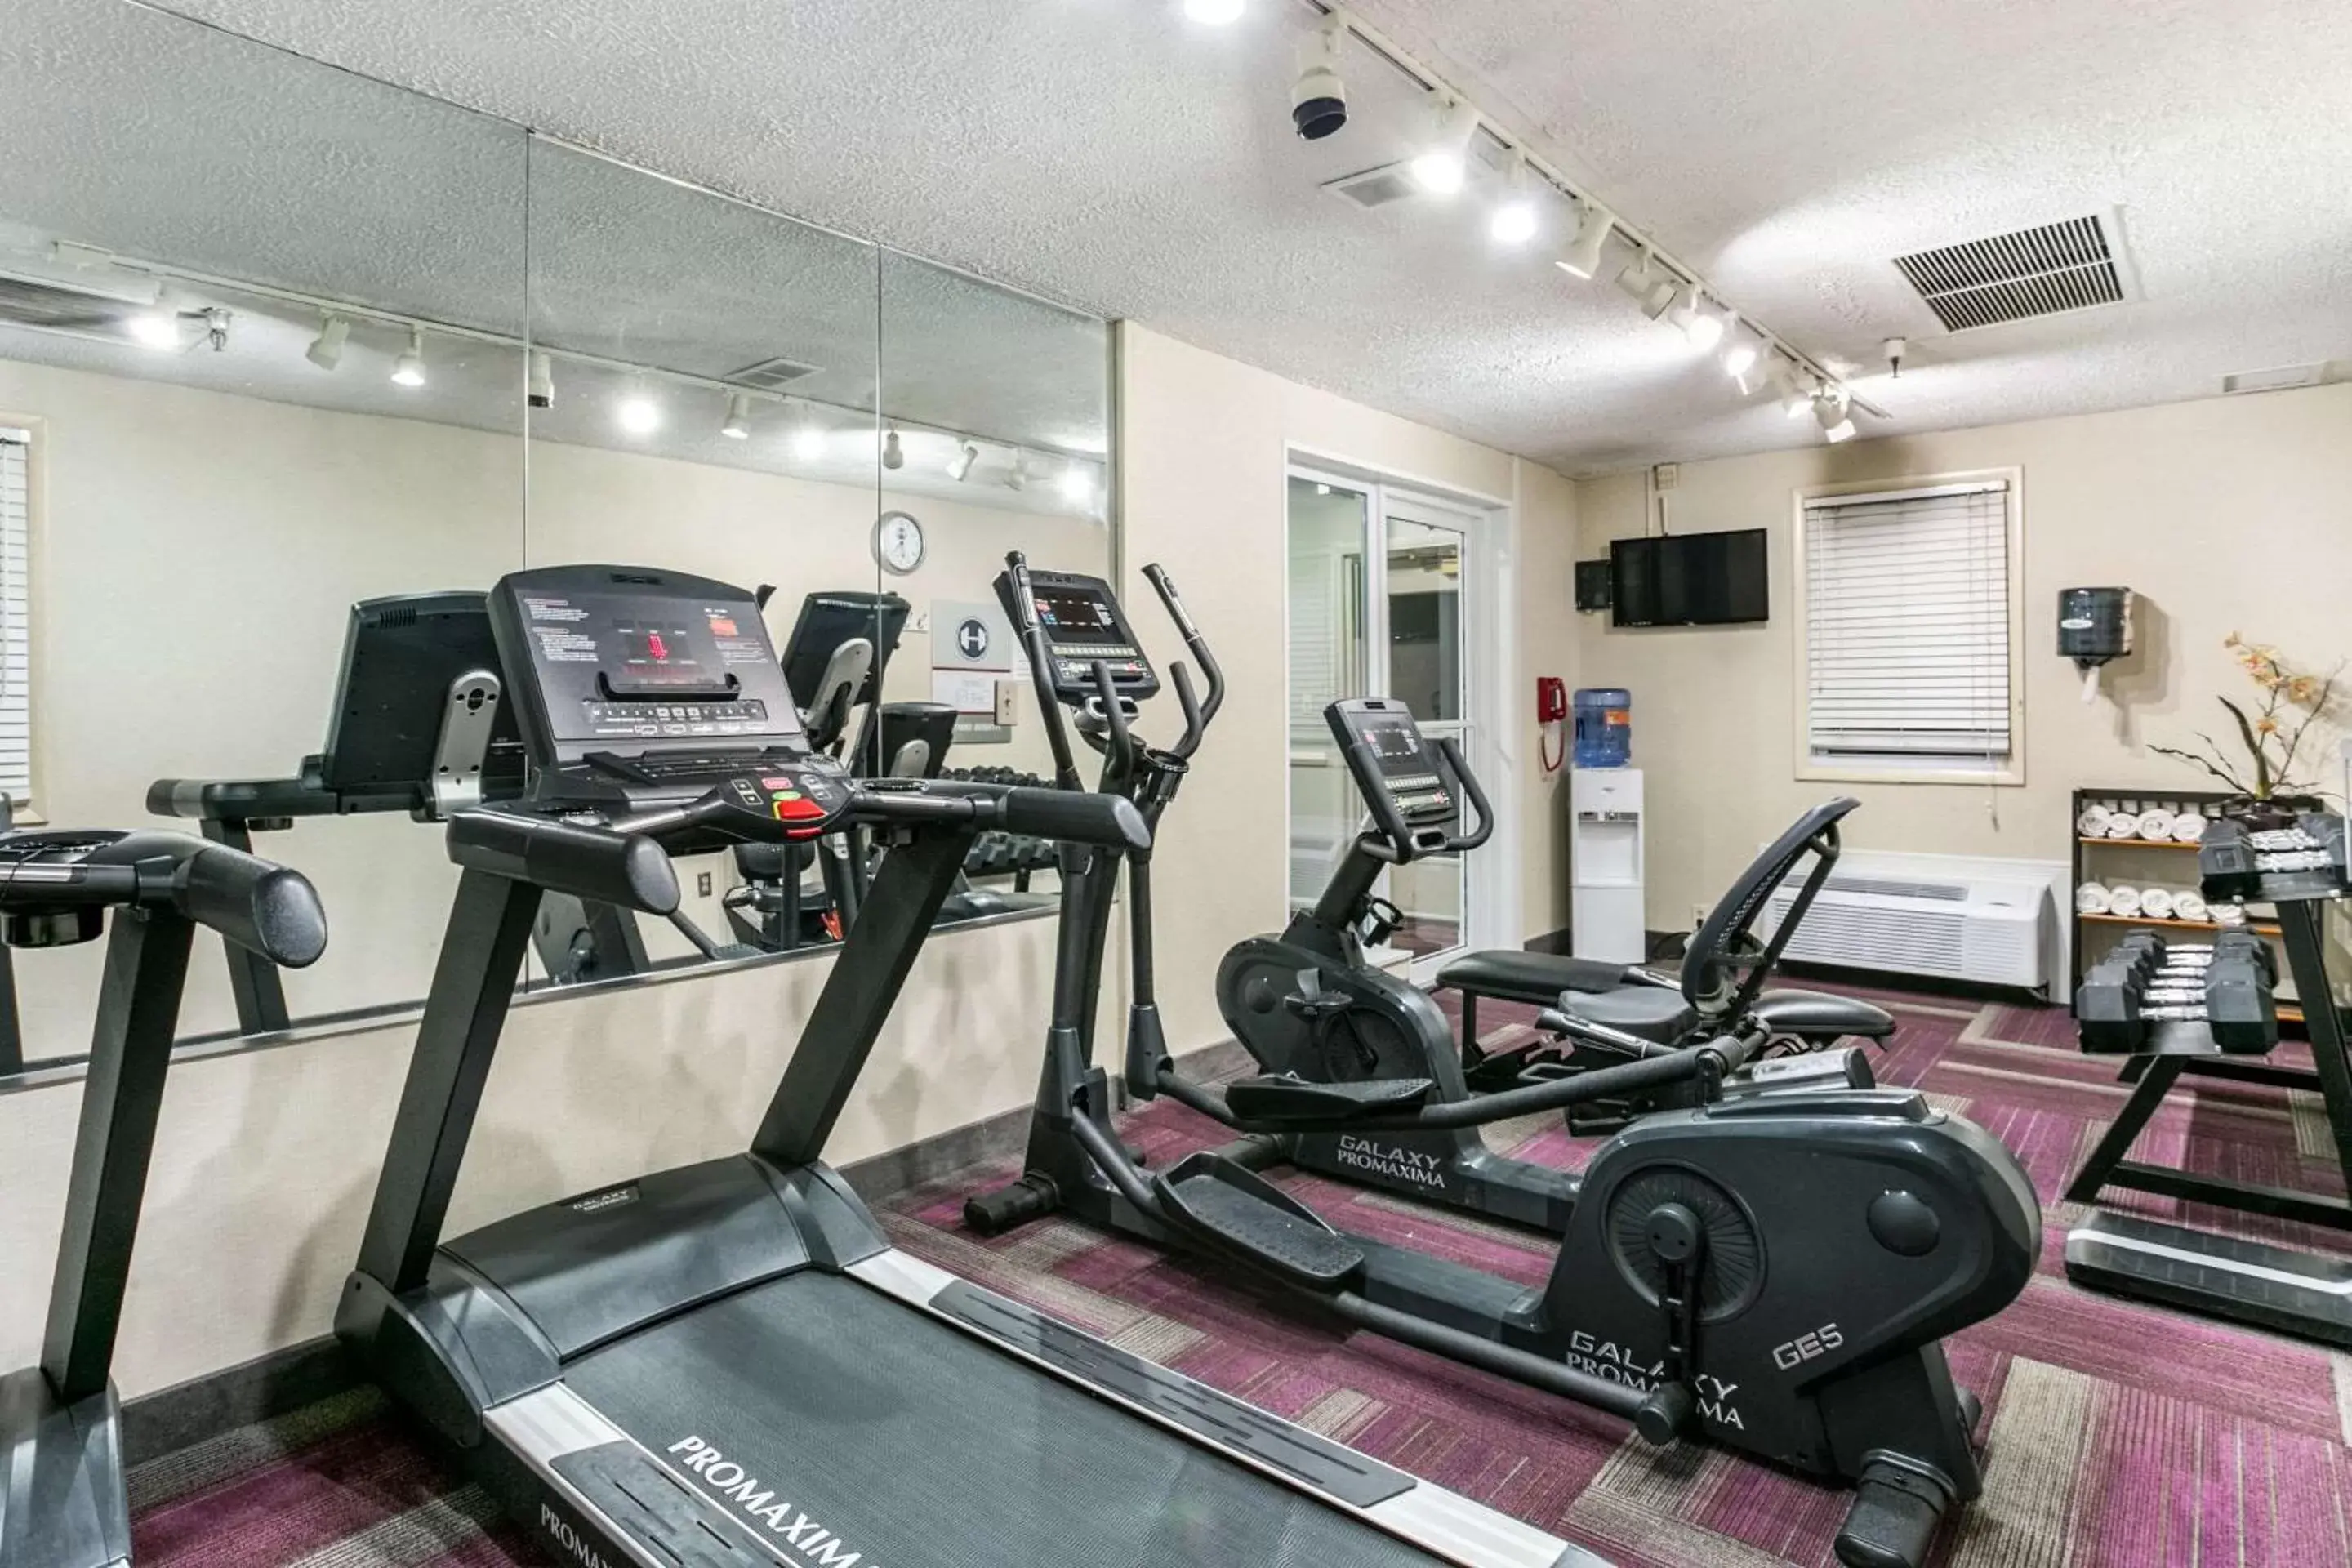 Fitness centre/facilities, Fitness Center/Facilities in Clarion Hotel BWI Airport Arundel Mills